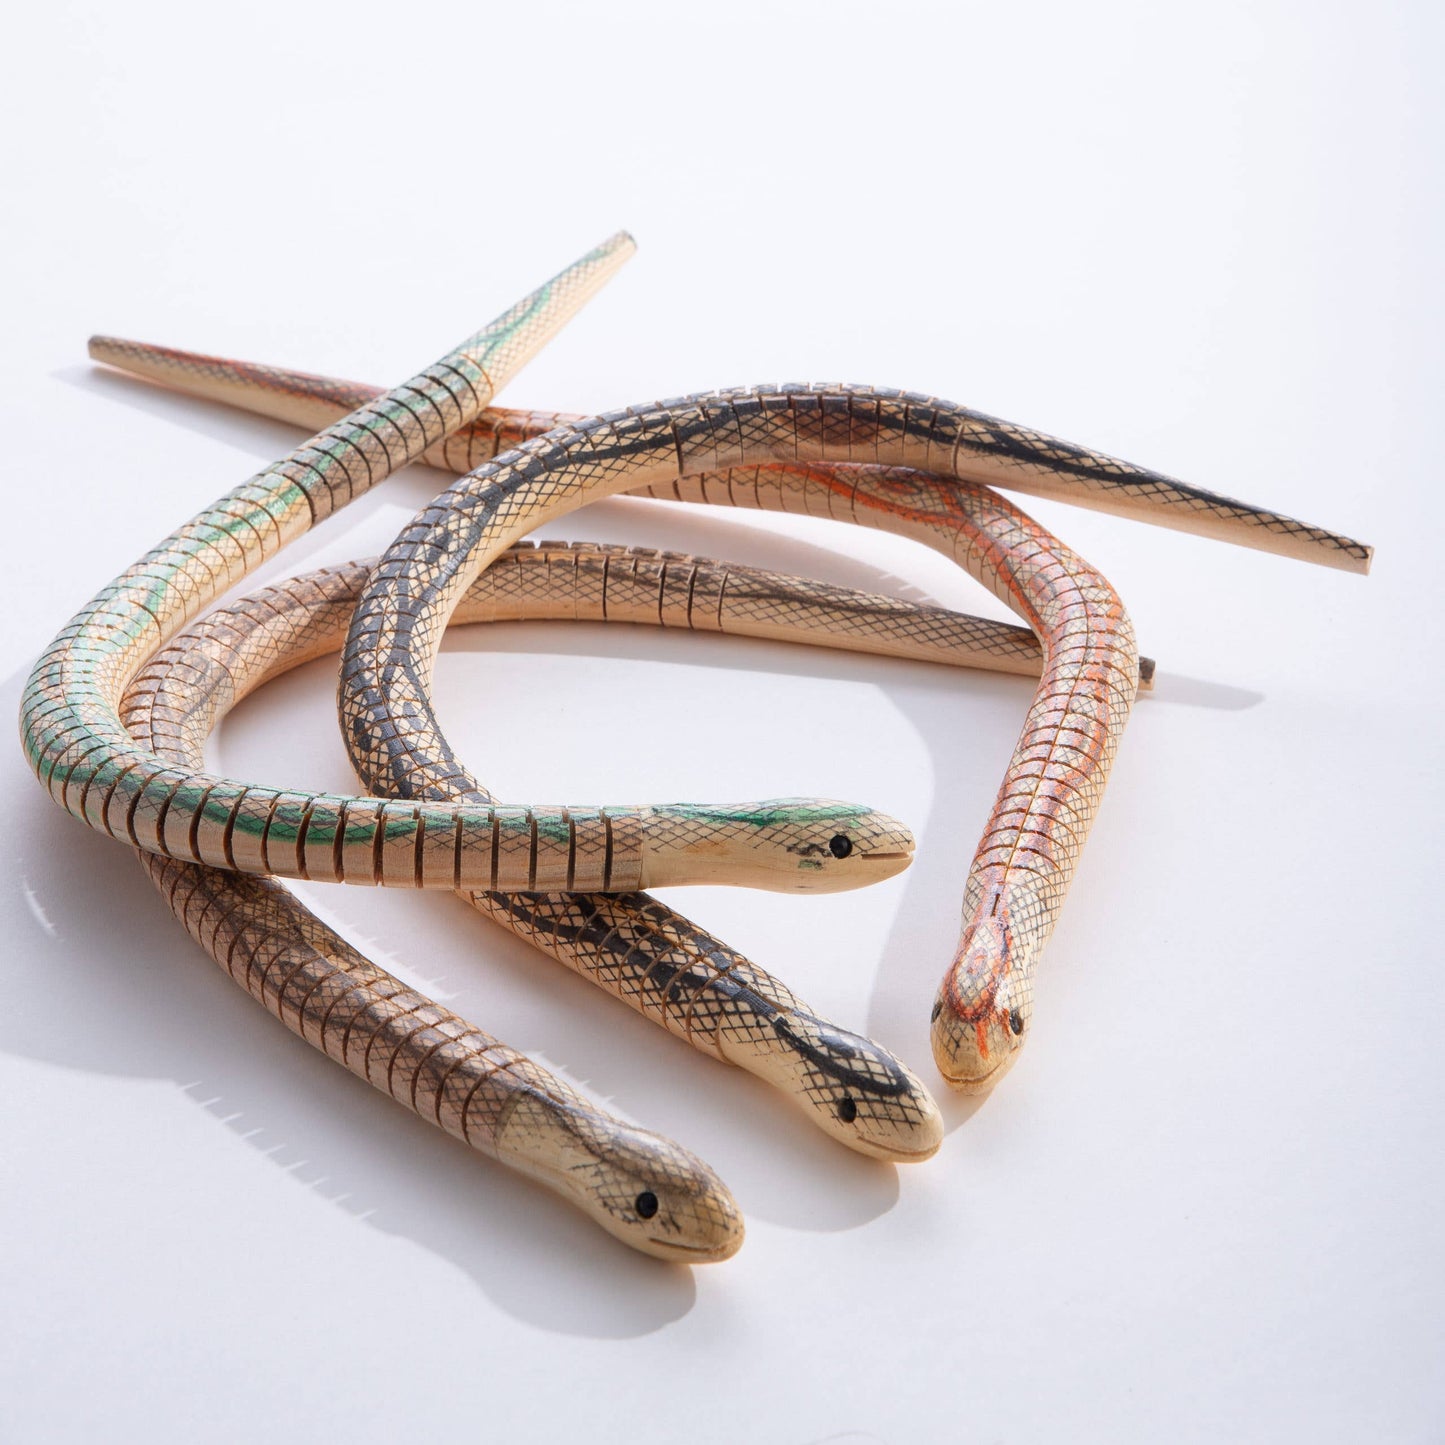 Wooden King Snakes